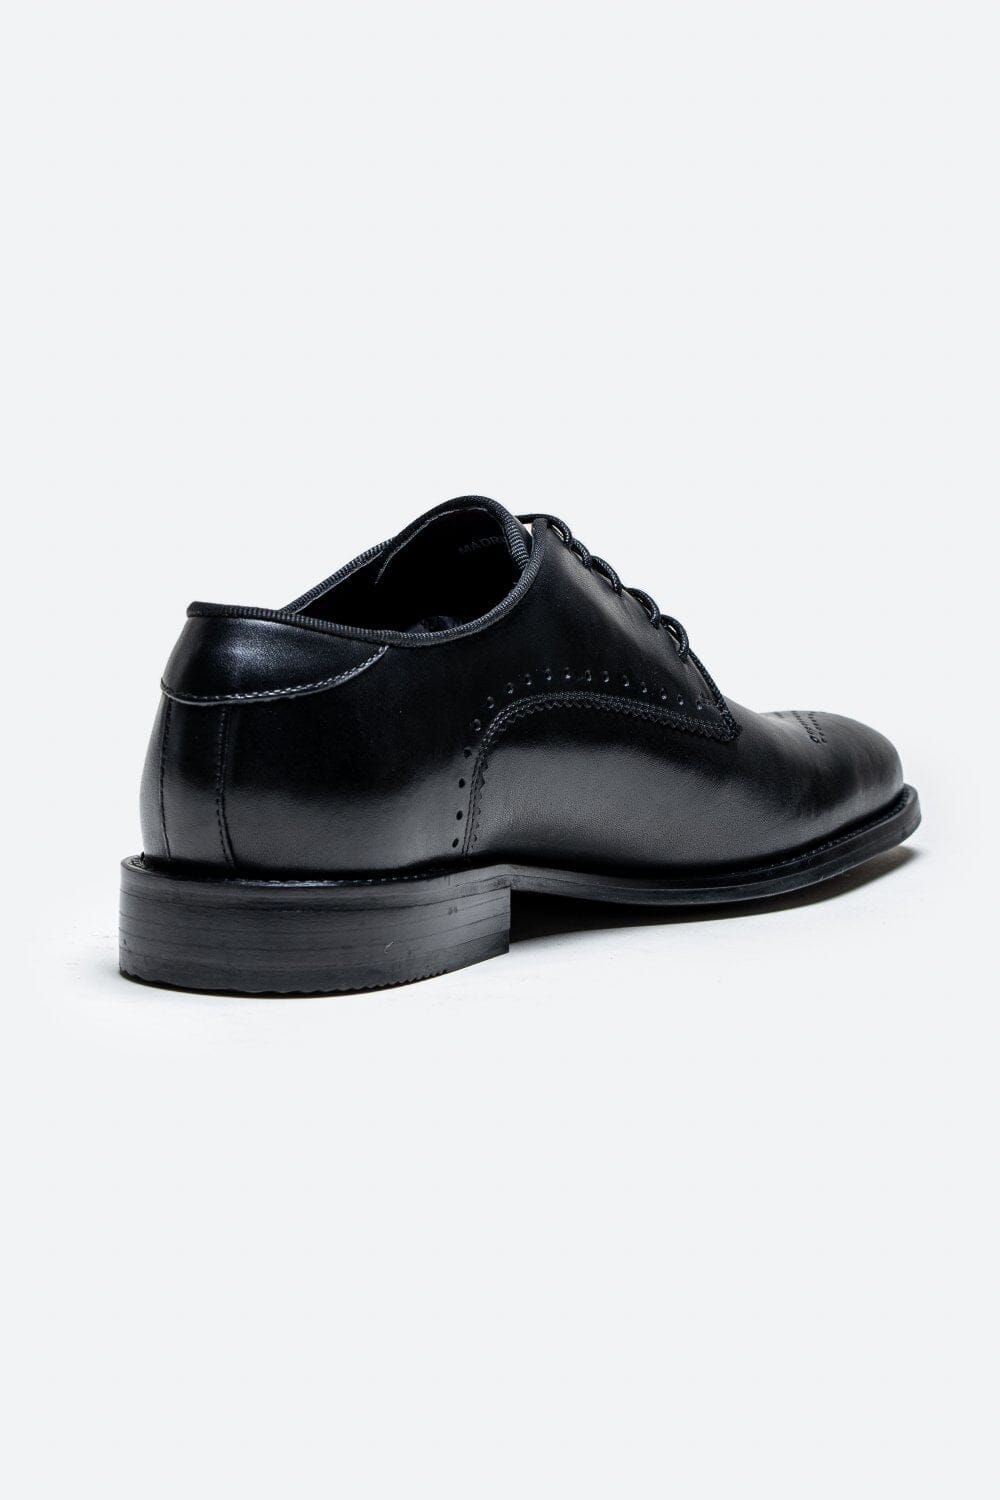 Madrid Black Shoes - Shoes - - THREADPEPPER